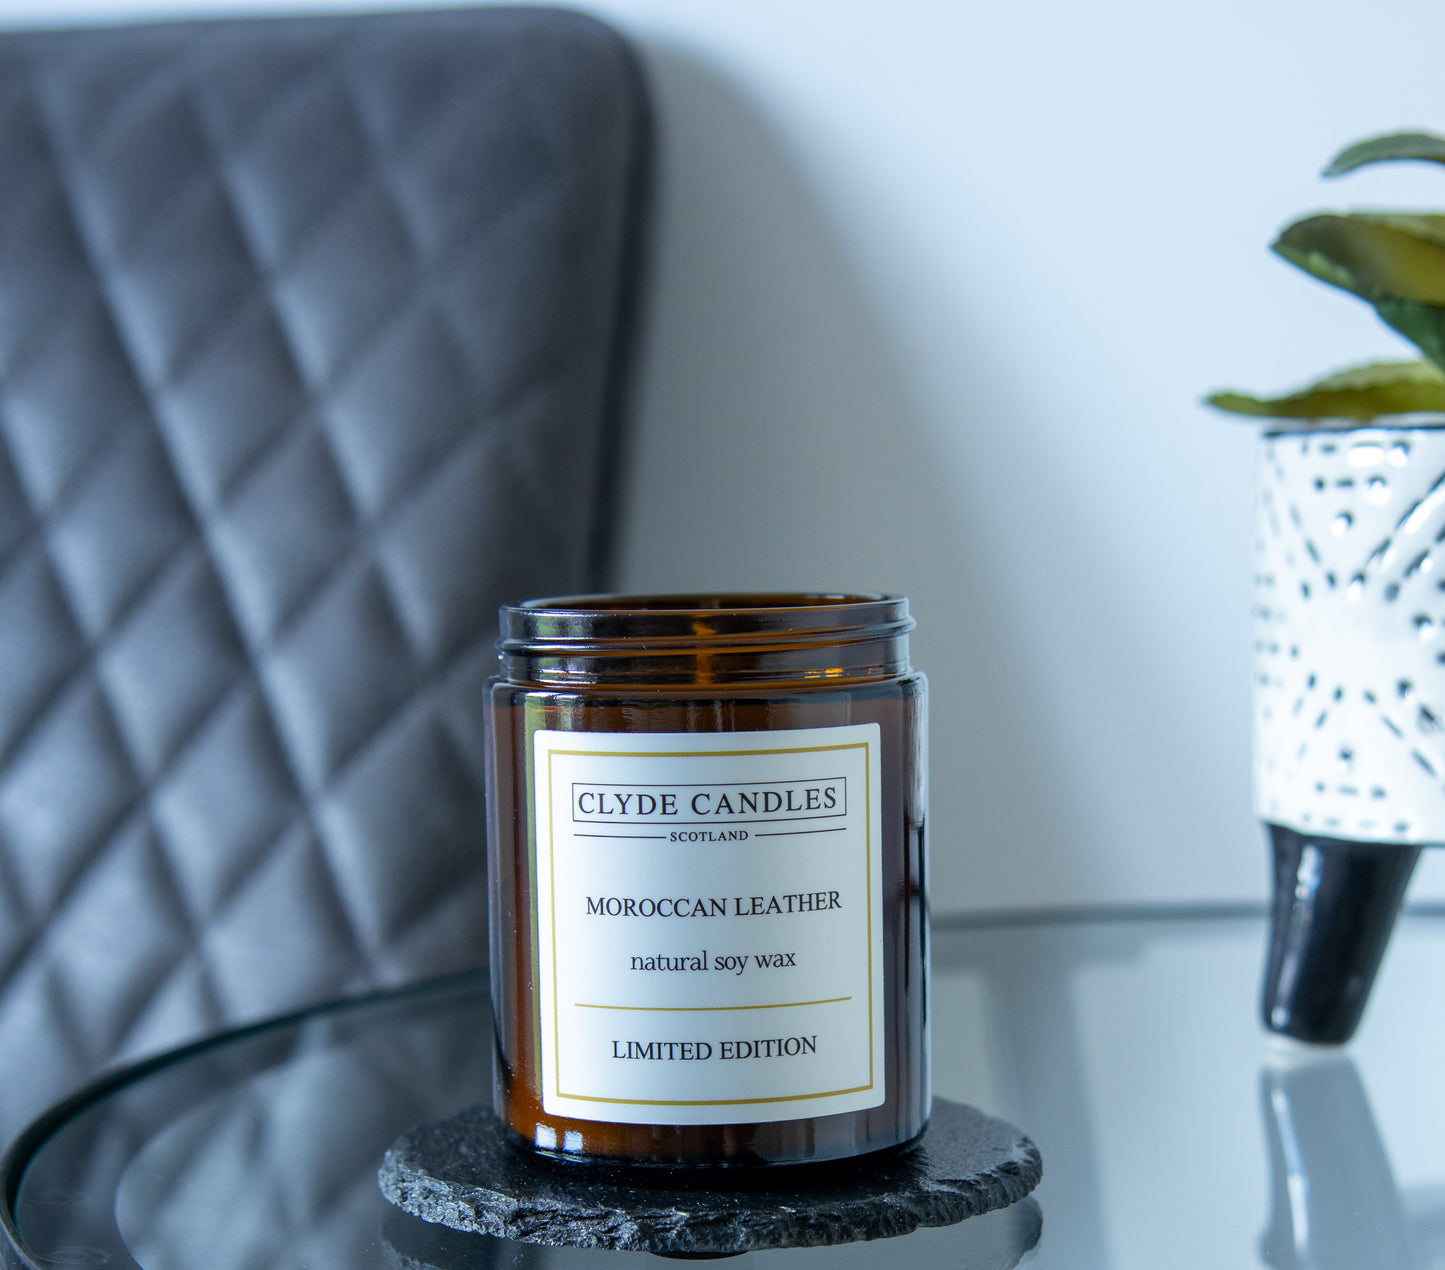 moroccan leather natural soy wax, clyde candles, hand made in scotland, scottish gifts, candle gifts, scented british candle gifts